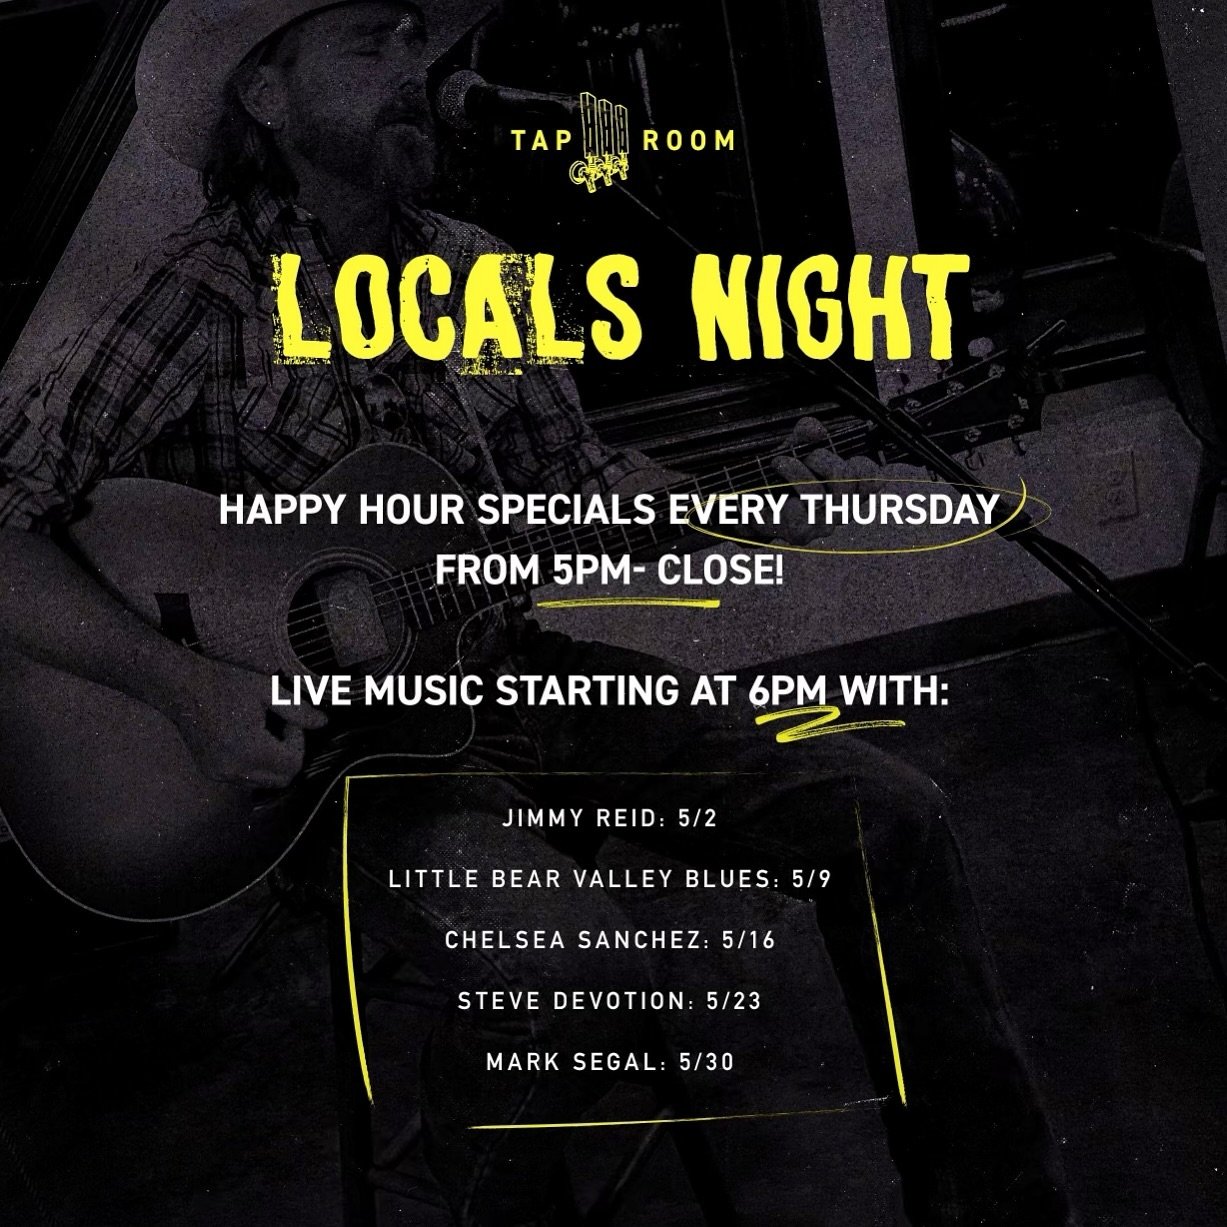 Join us every Thursday for
happy hour specials and live music! Tonight we have Jimmy Reid playing for us, starting at 6PM!
We&rsquo;ll see you soon! #HappyHour #LocalsNight #IndustryNight #LakeArrowhead #livemusic